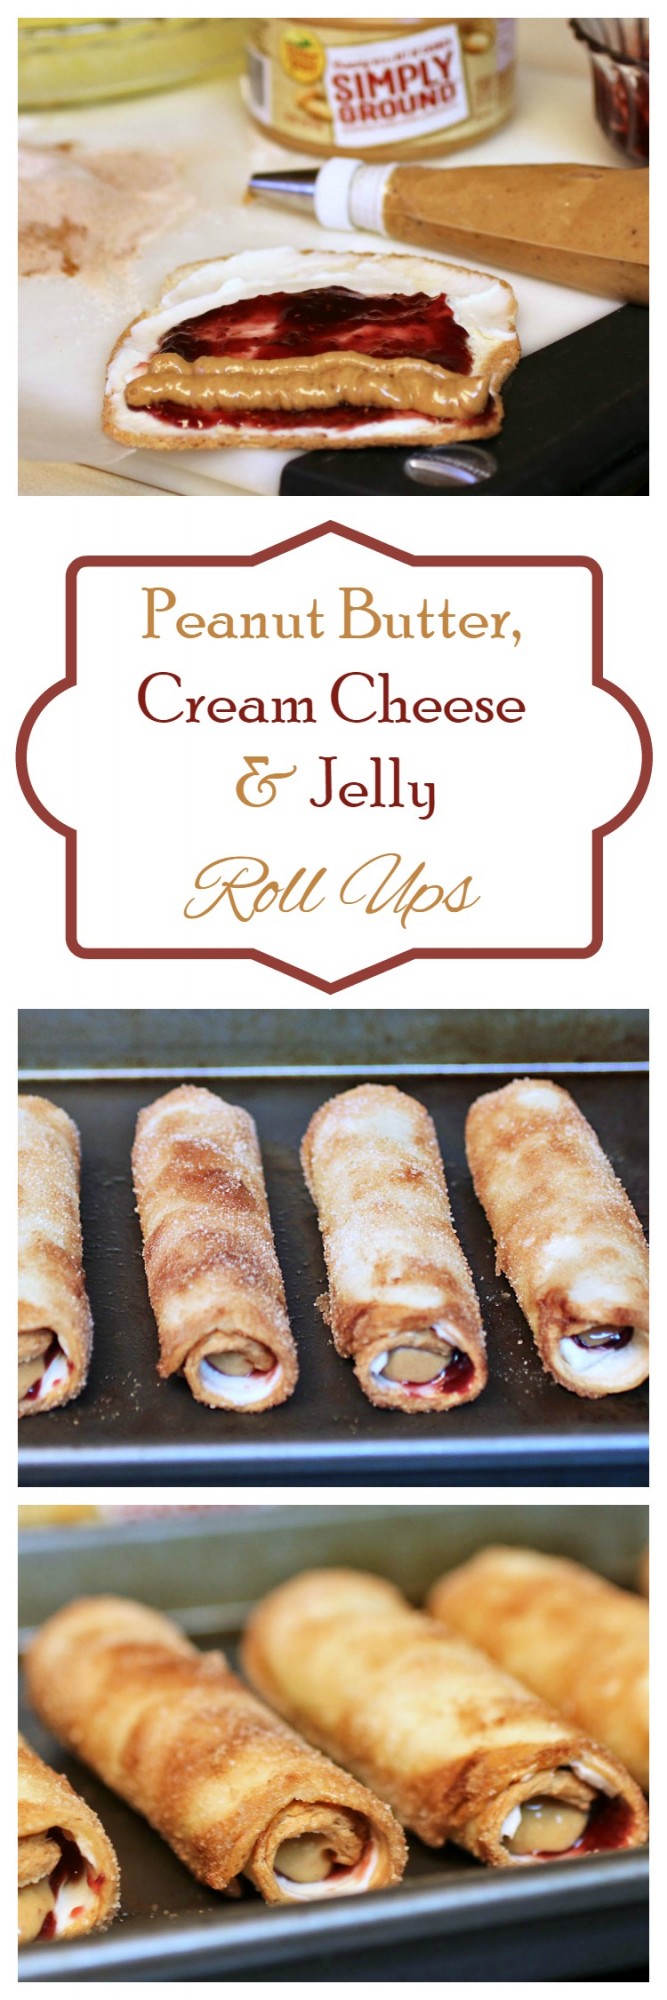 Peanut Butter, Cream Cheese  and Jelly Roll Ups